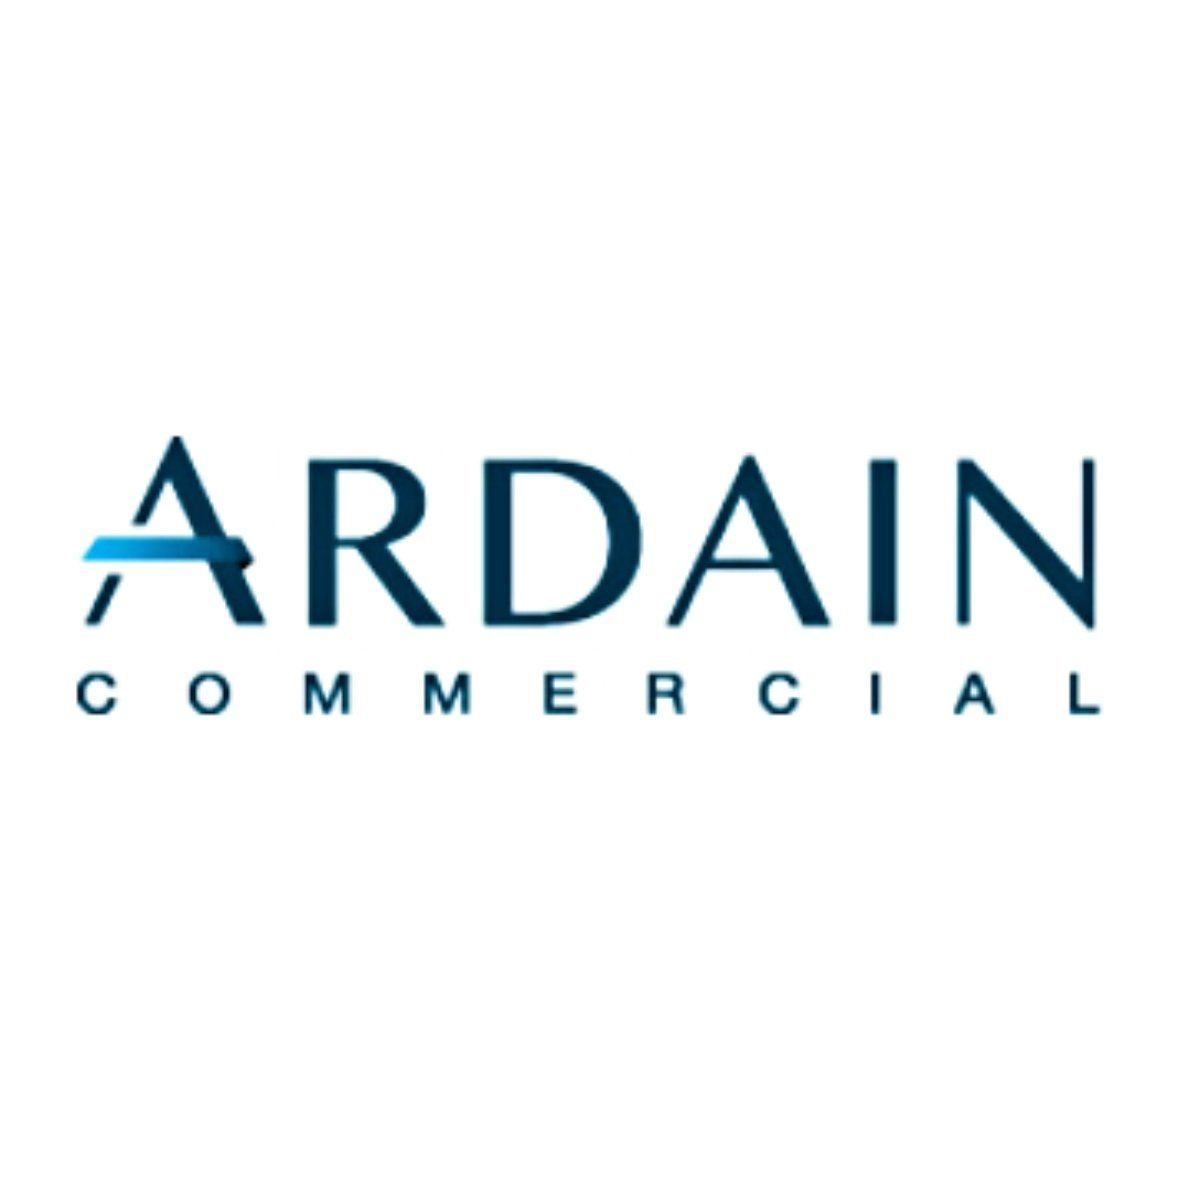 Umhlanga Commercial Property | Ardain Commercial